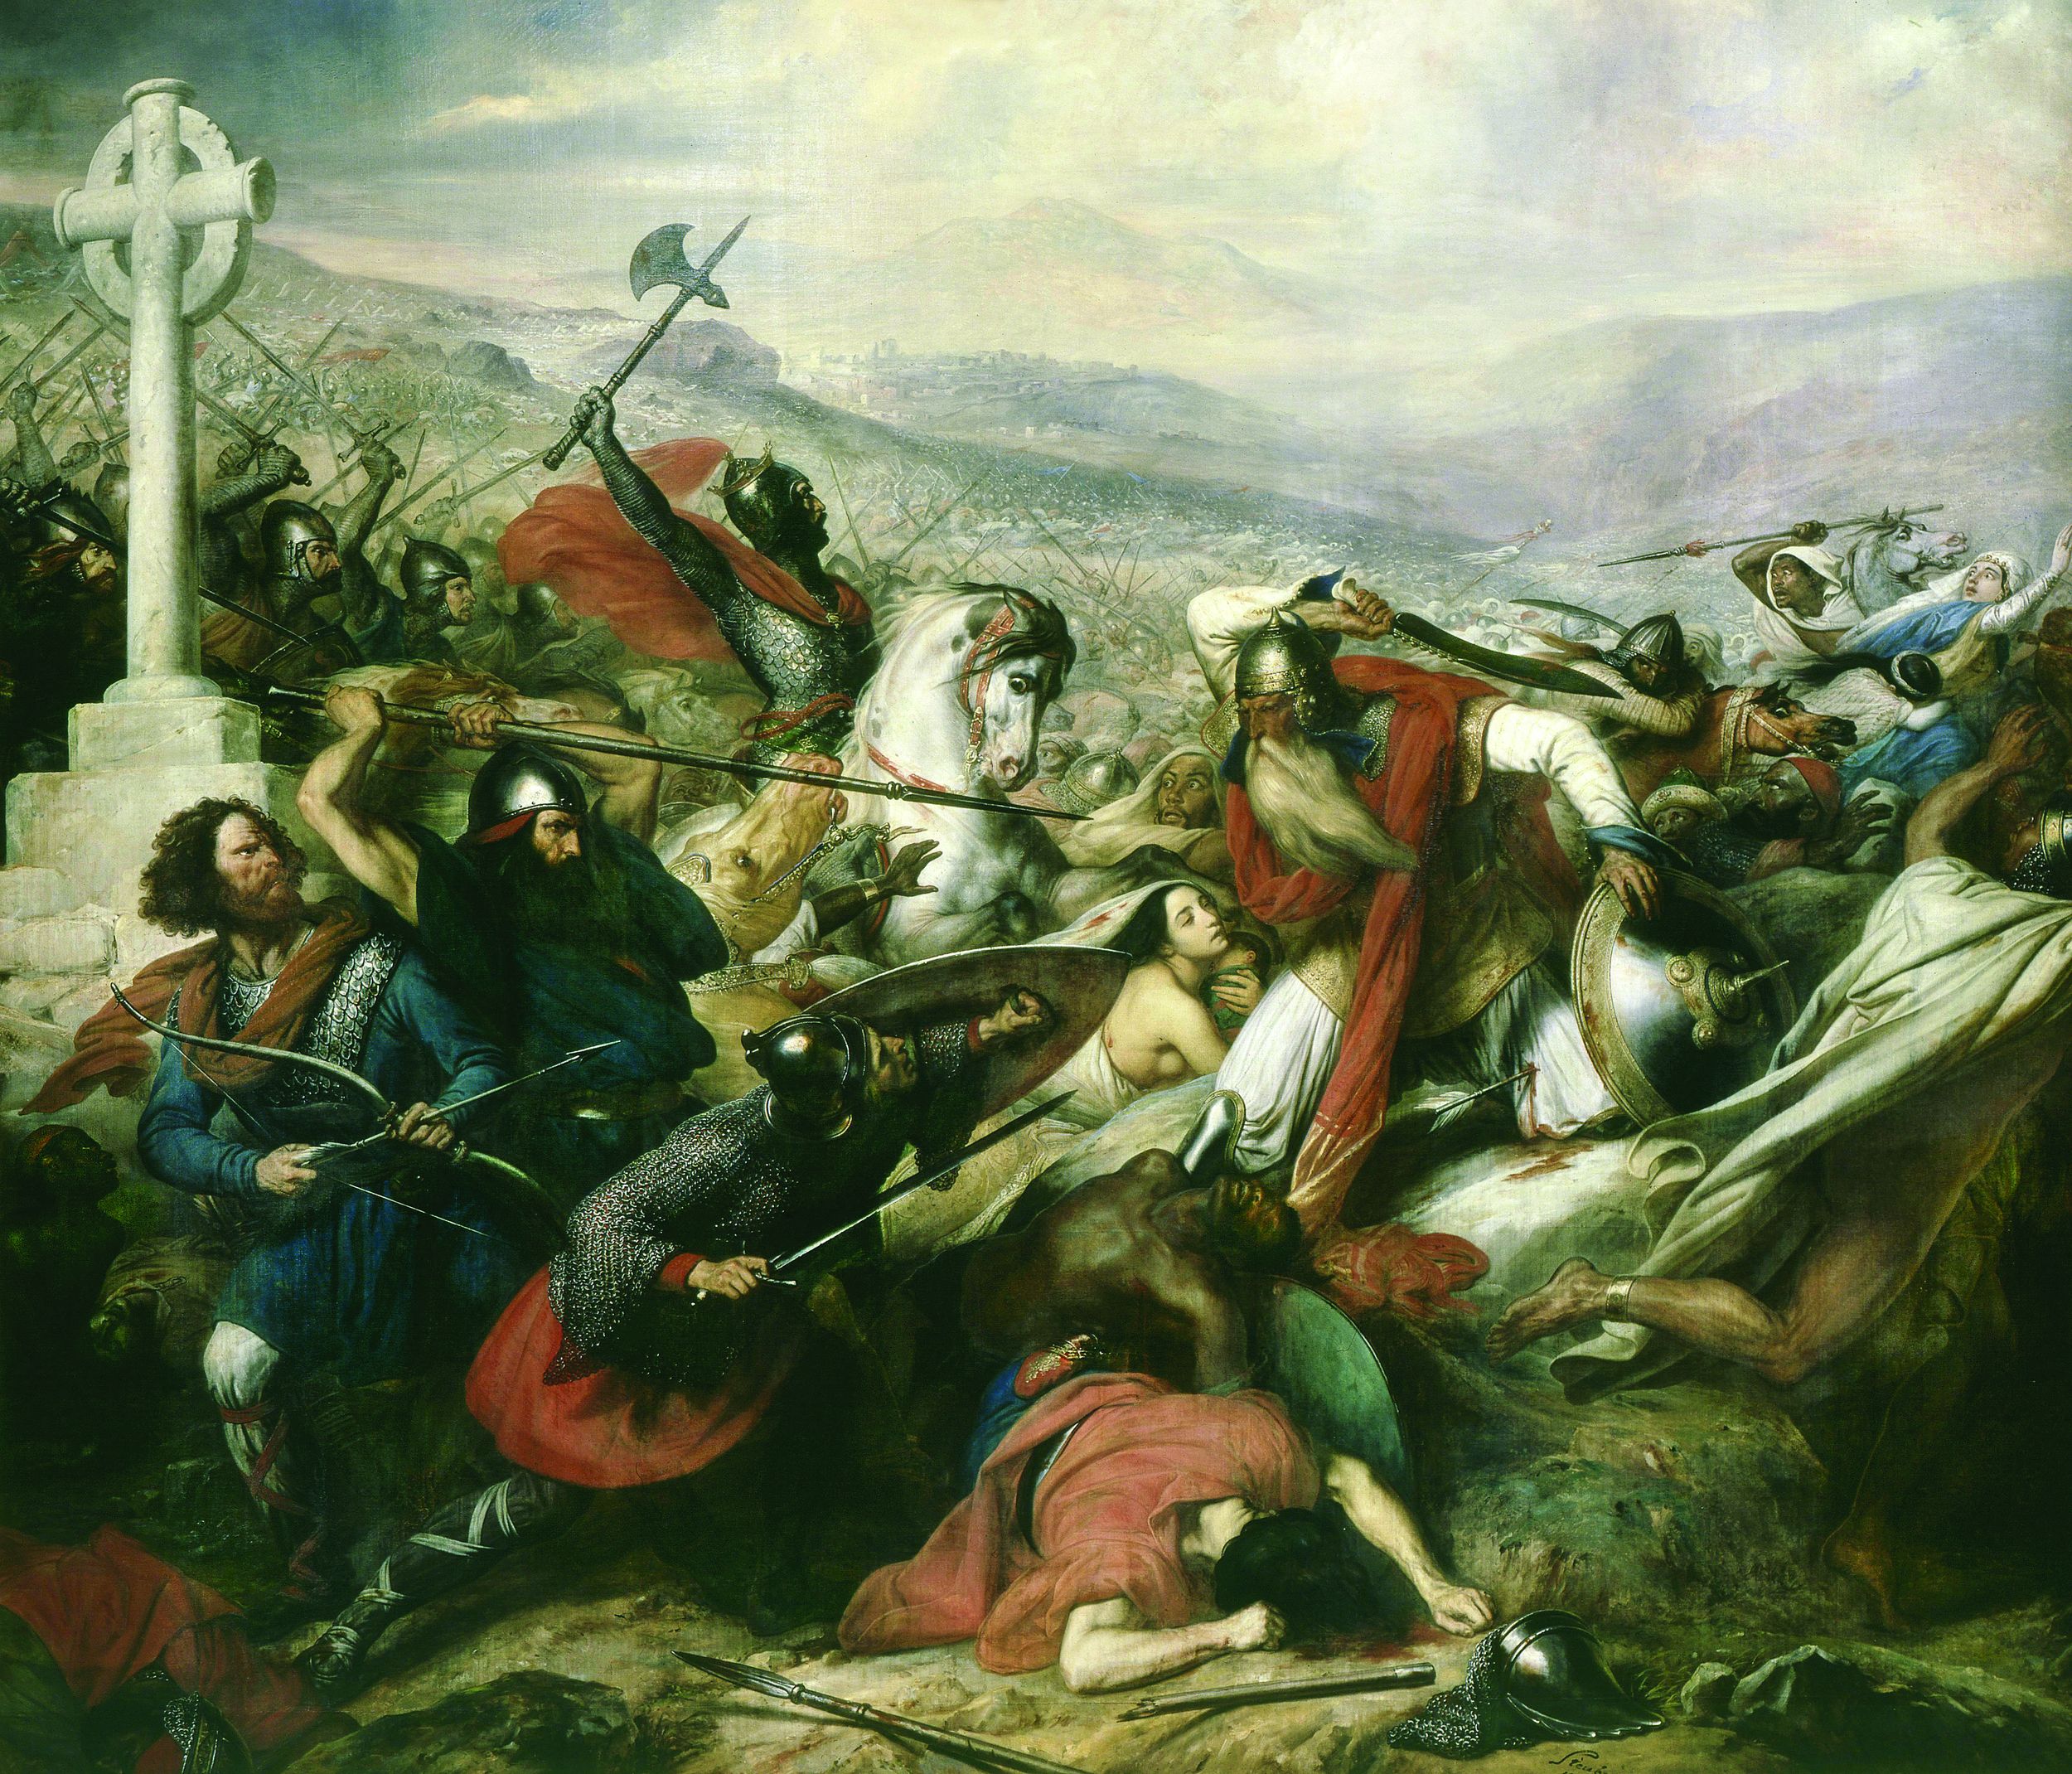 With a Christian cross prominently displayed at left, Charles Martel’s Frankish forces beat back Muslim invaders at Tours in Charles Steuben’s 19th-century painting.